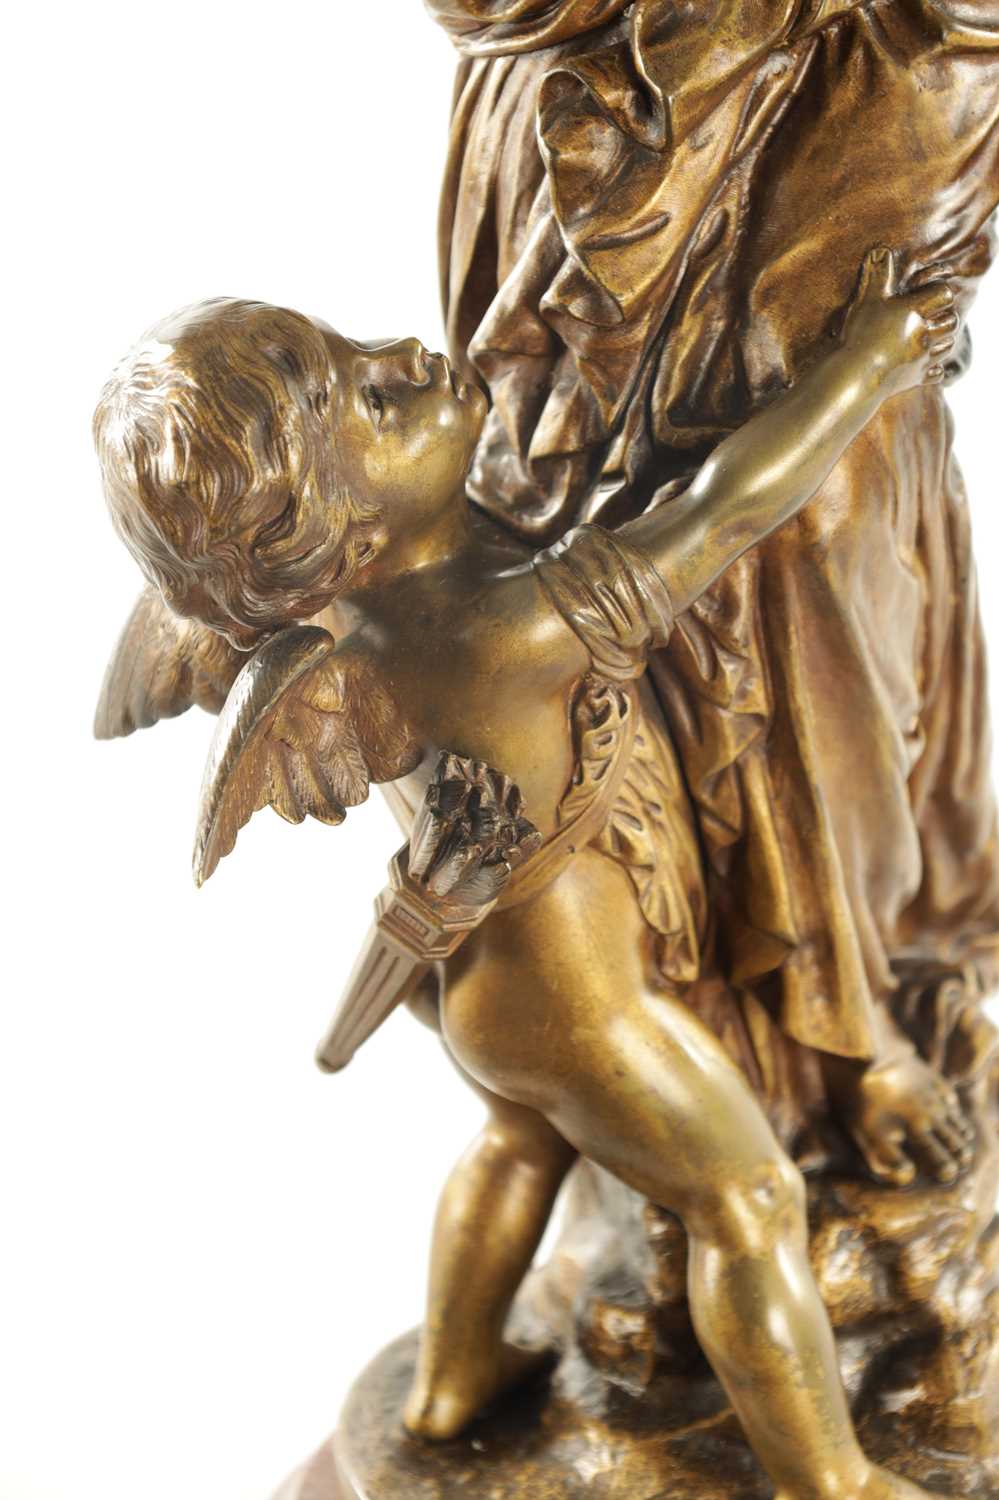 JEAN BULIO (FRENCH 1827 - 1911) A 19TH CENTURY GILT BRONZE FIGURE DEPICTING ‘PSYCHE AND LOVE’ - Image 2 of 8